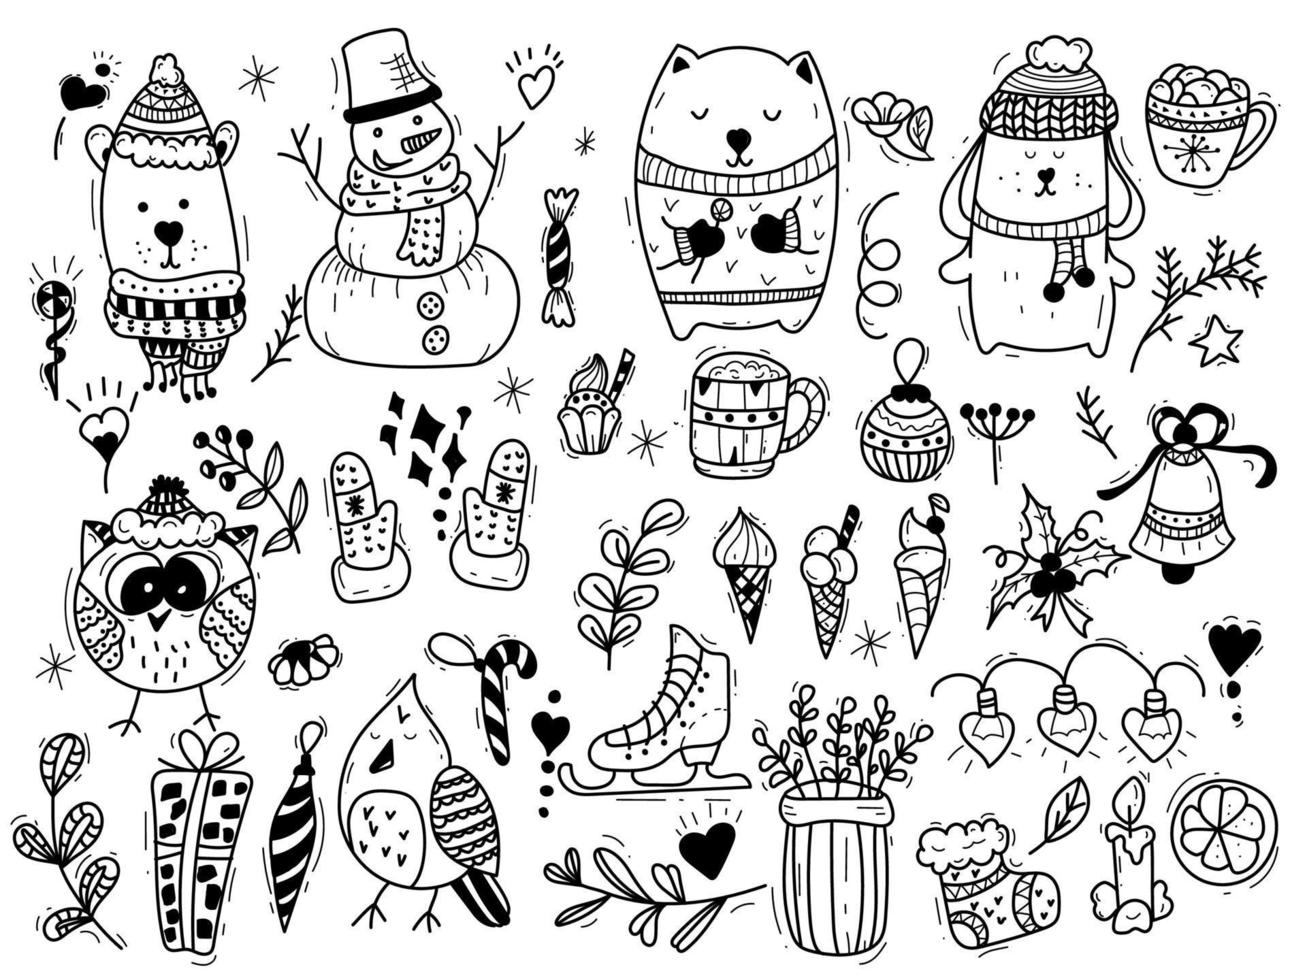 Winter season themed doodle set - snowflakes, icicles, classic ornaments, knitted wear, winter sports. vector